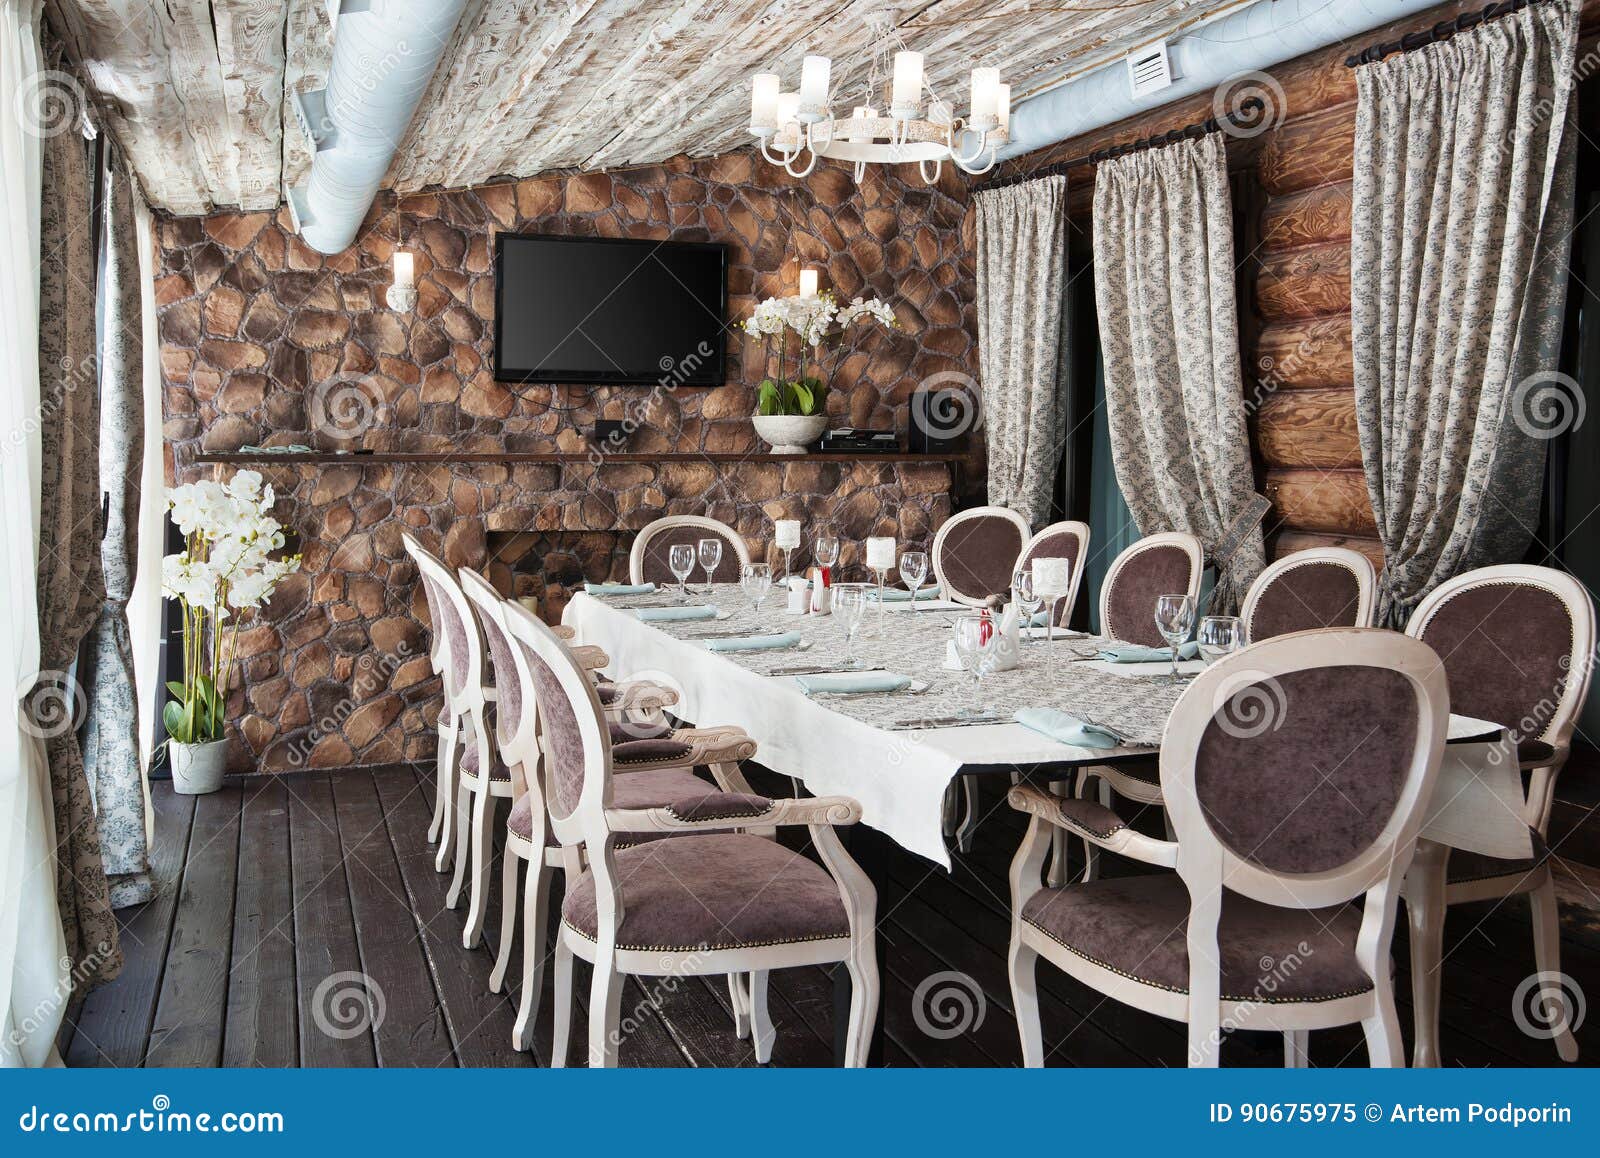 Interior Of Banquet Hall In The Restaurant Small Table With